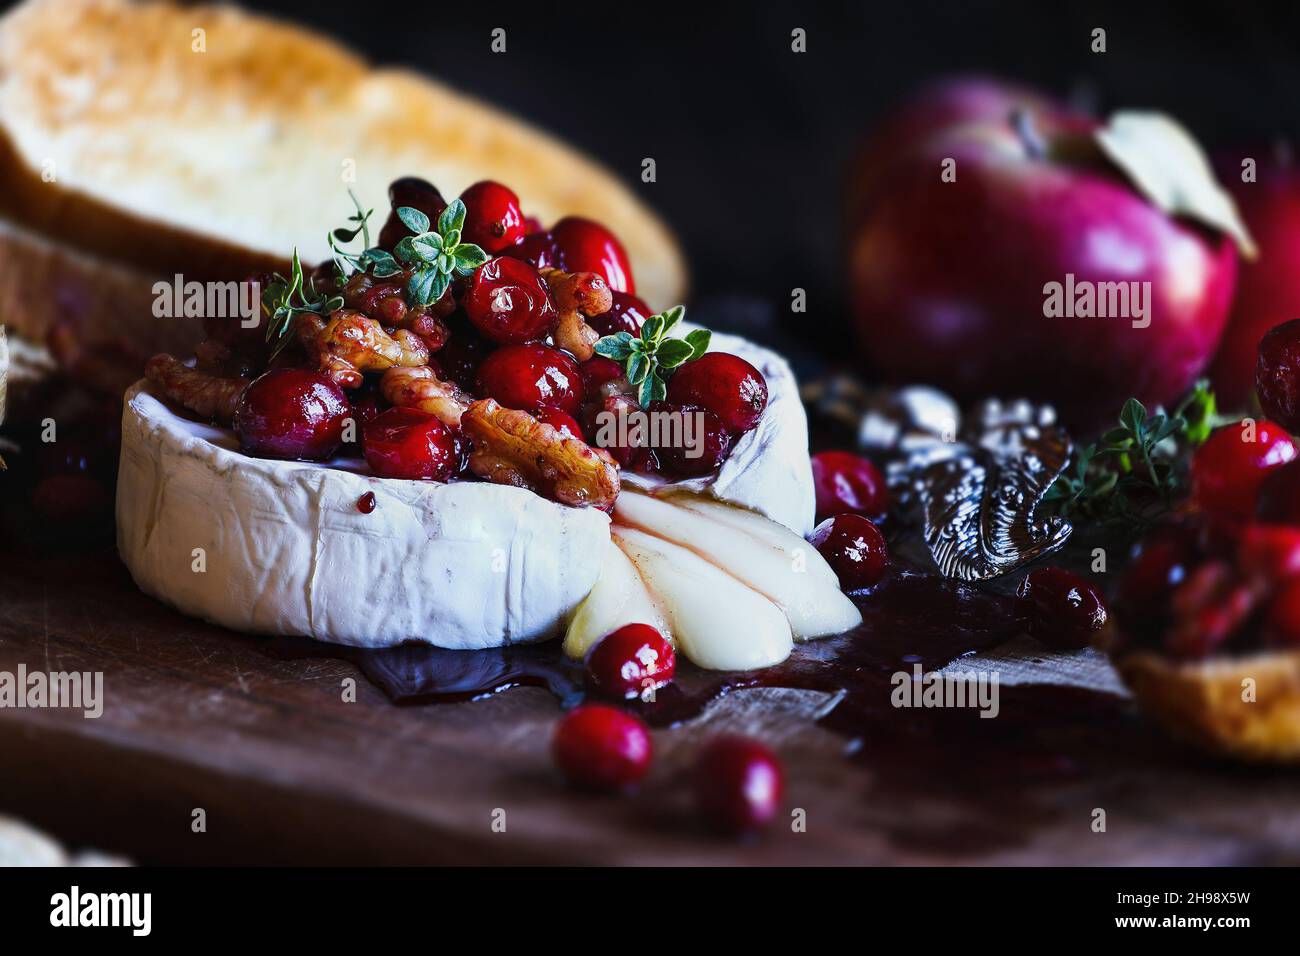 Baked Camembert Brie cheese with a cranberry, honey, balsamic vinegar and nut relish and garnished with thyme. Served with toasted bread slices and ap Stock Photo